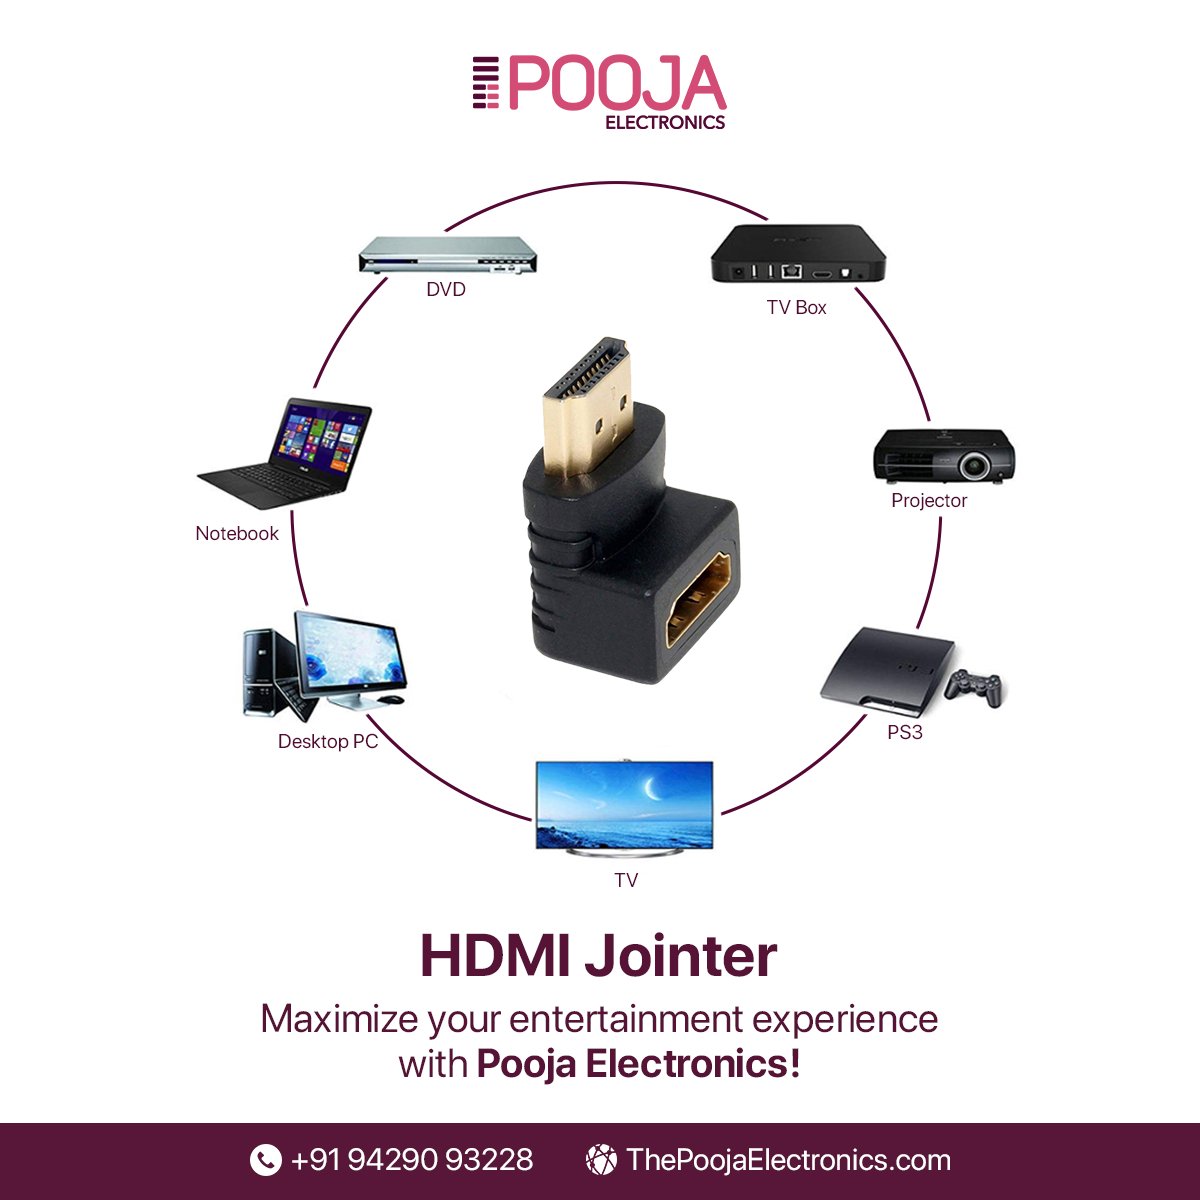 Enjoy seamless audio and video transmission with our top-notch HDMI cables with the HDMI Jointer.
.
#poojaelectronics #hdmijointer #HighDefinition #Connectivity #AudioVideo #HomeTheater #Entertainment #TechAccessories #DigitalConnections #HighSpeed #TrustedRepairs